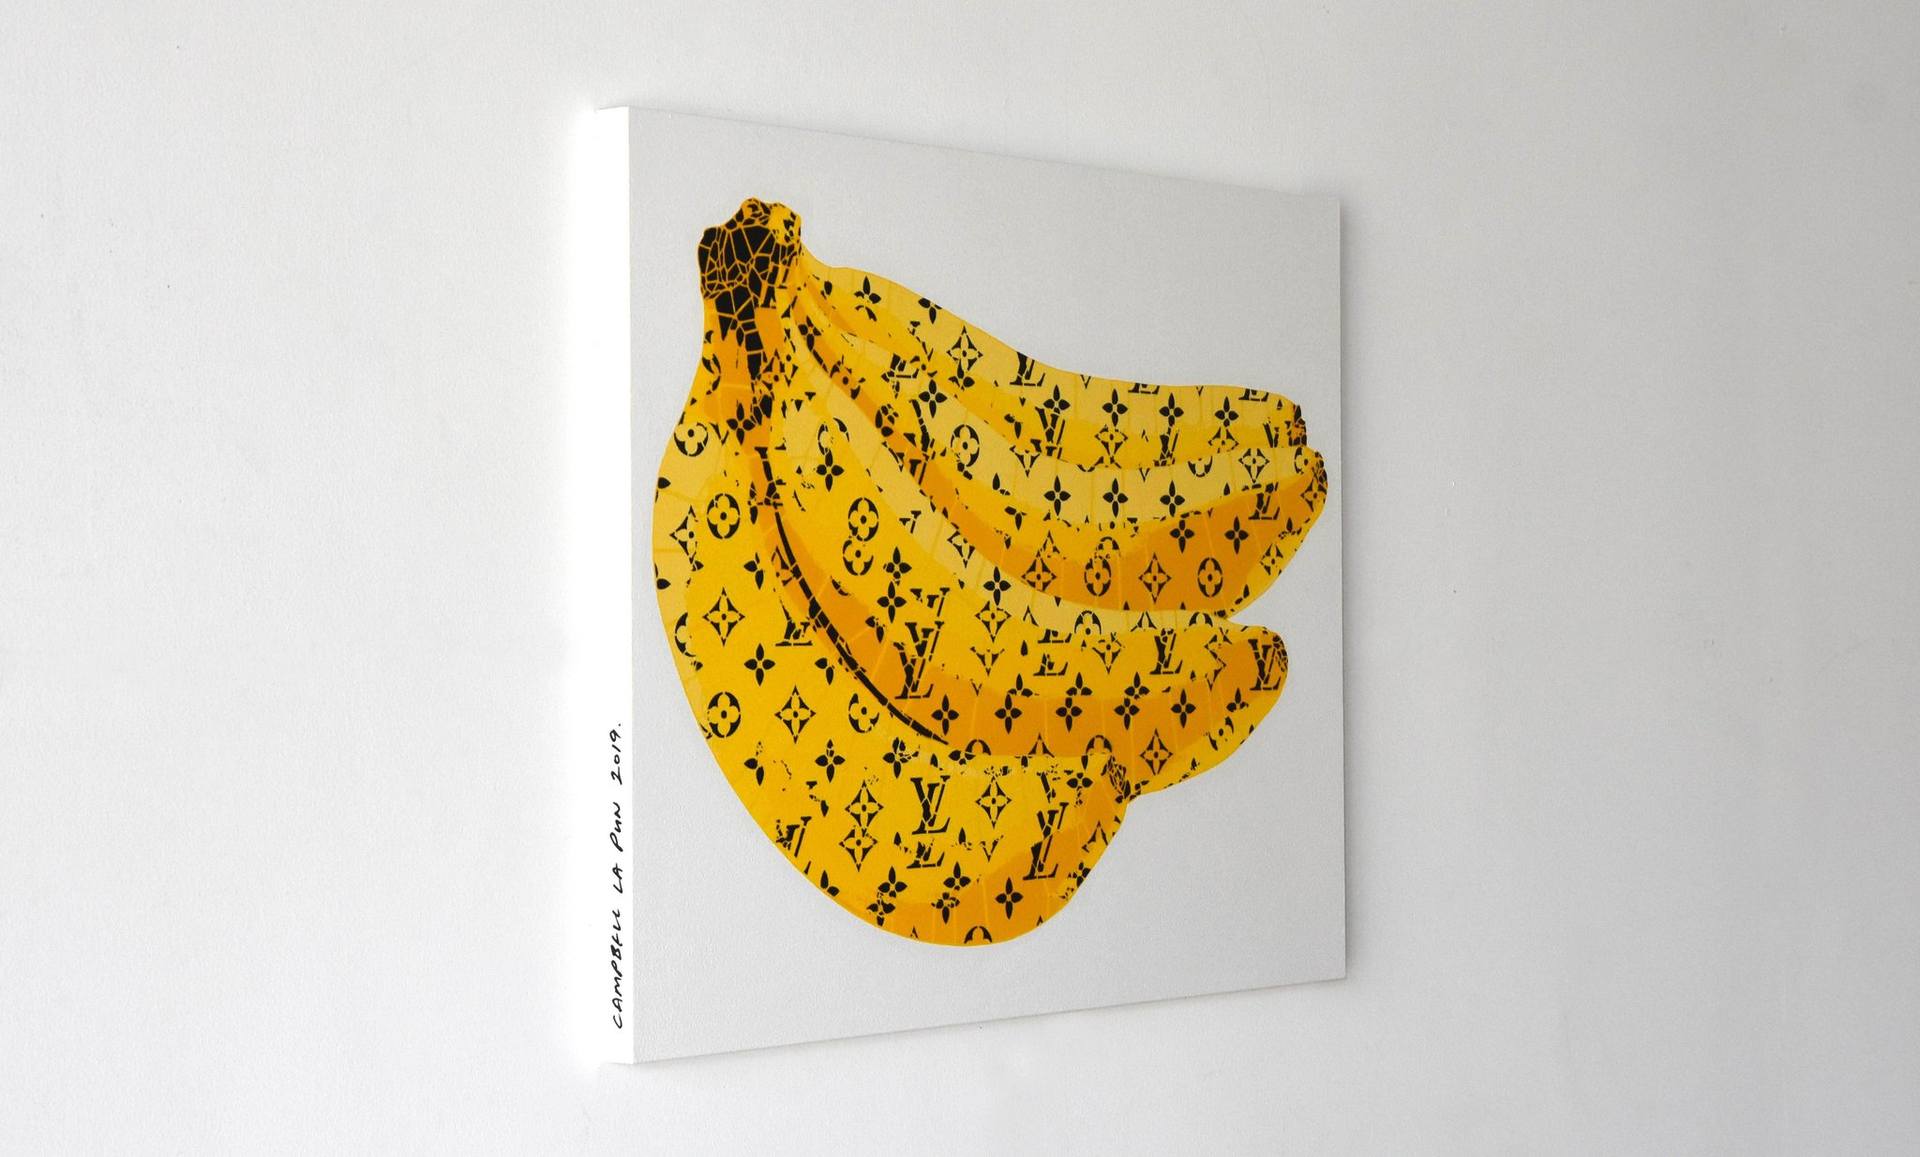 LV Banana Pink - Tokyo Edition (Ed. 5 of 15) Painting by Campbell